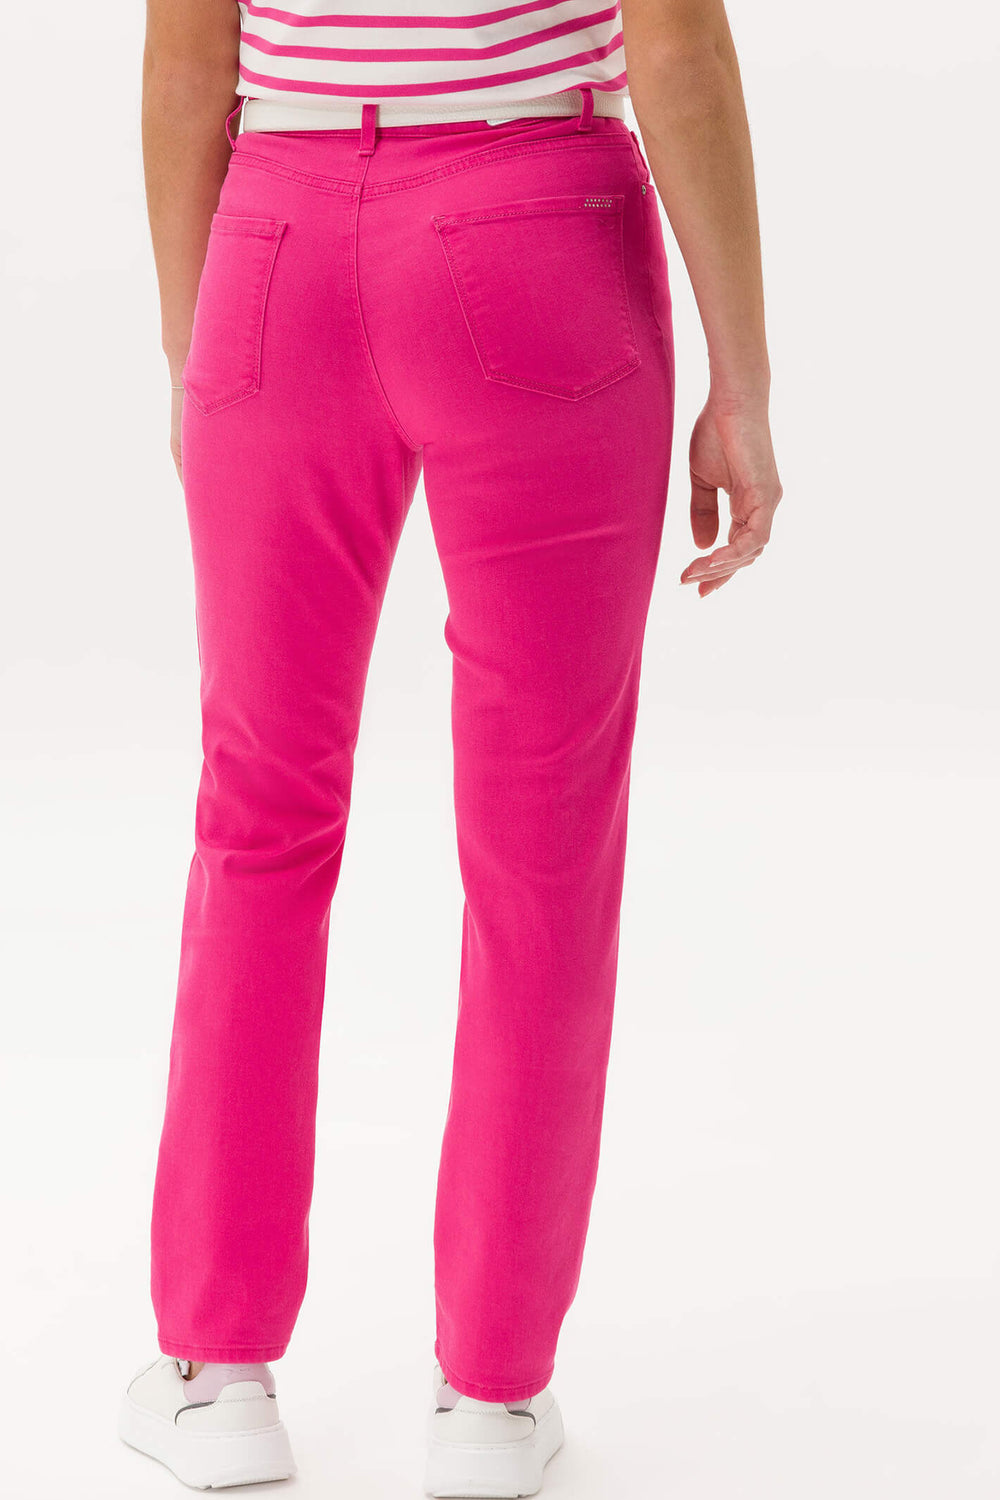 Brax 72-4058 85 Mary Flush Pink Slim Fit Straight Cut Five Pocket Jeans - Shirley Allum Boutique